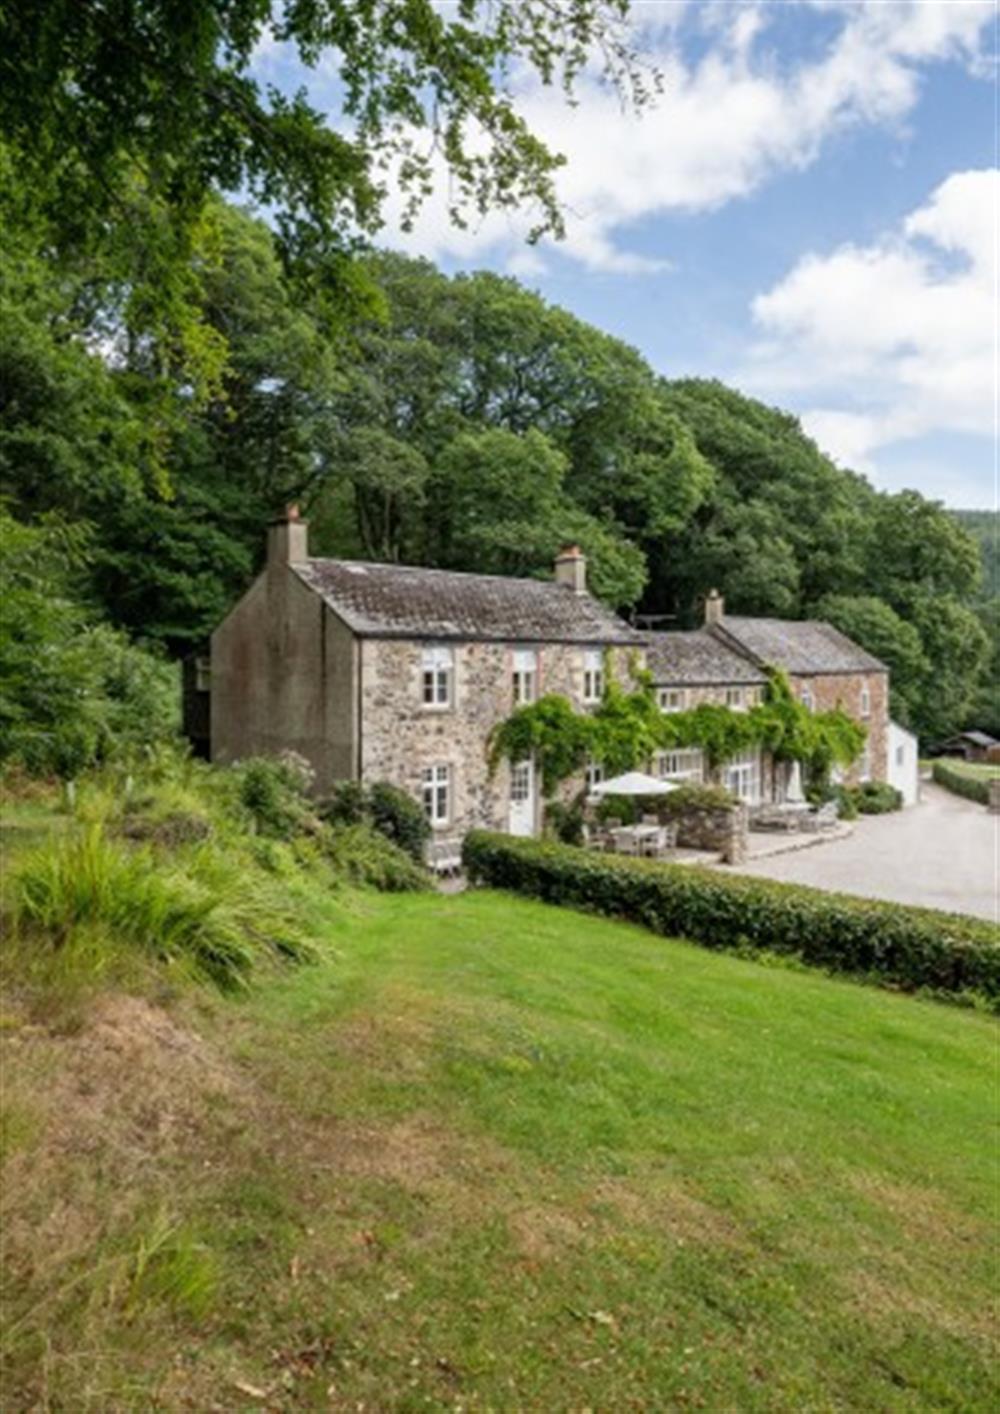 Holne Chase Grooms Cottage is a detached property